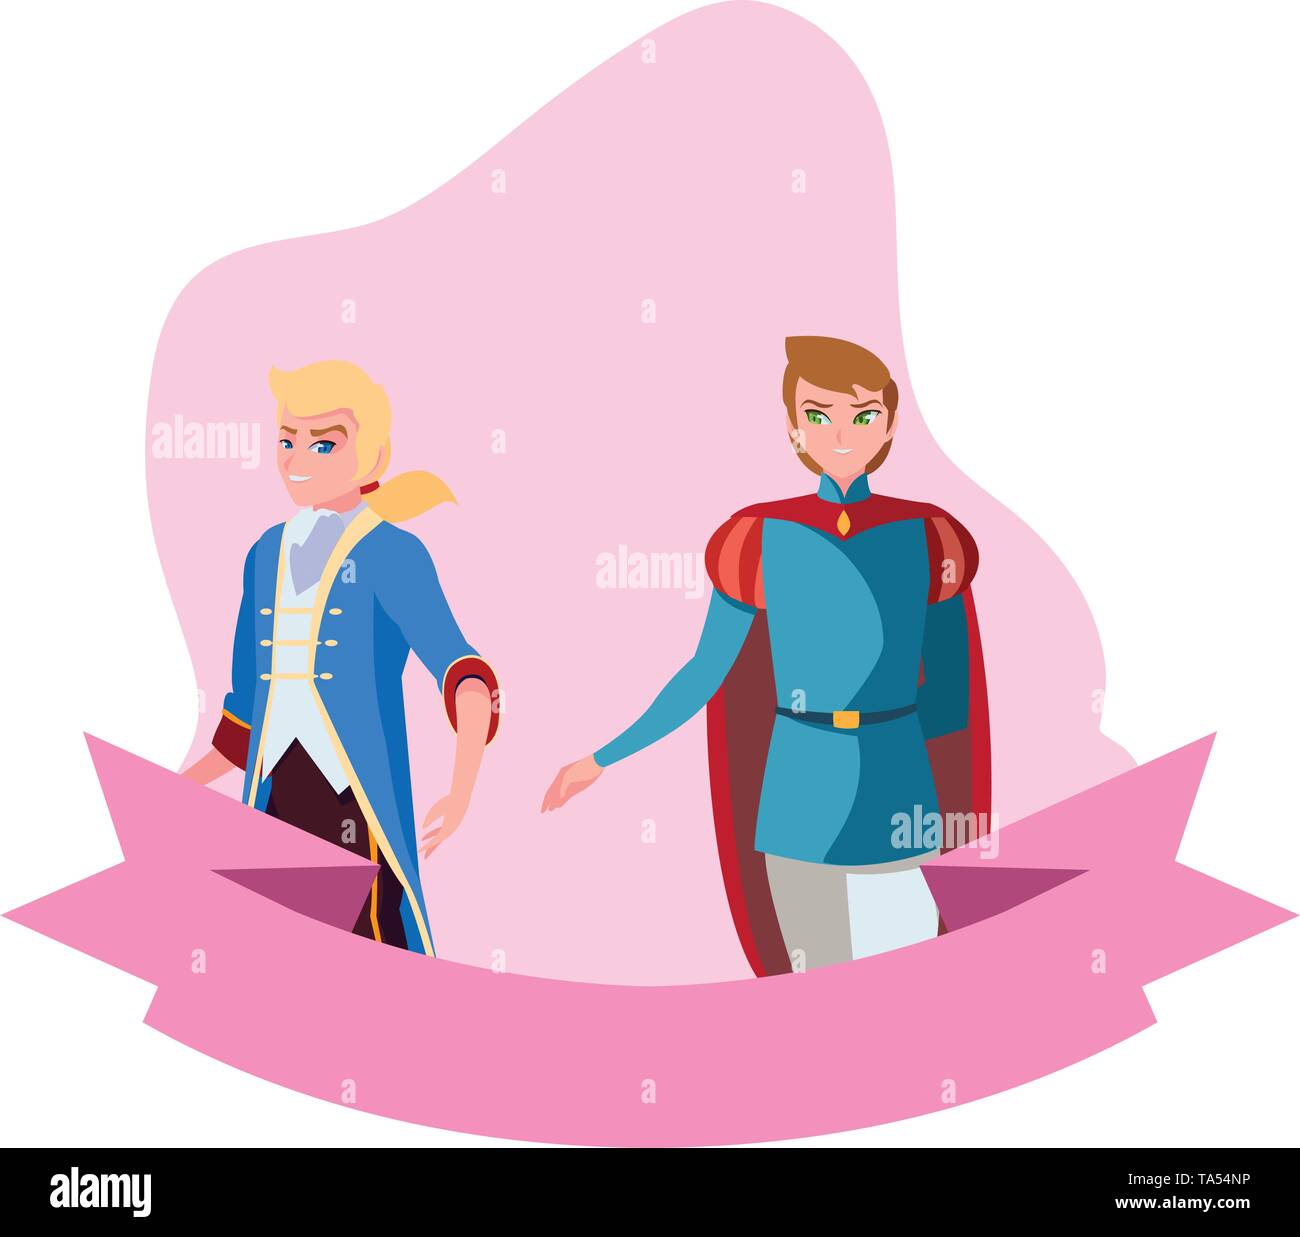 princes charming of tales characters vector illustration design Stock Vector